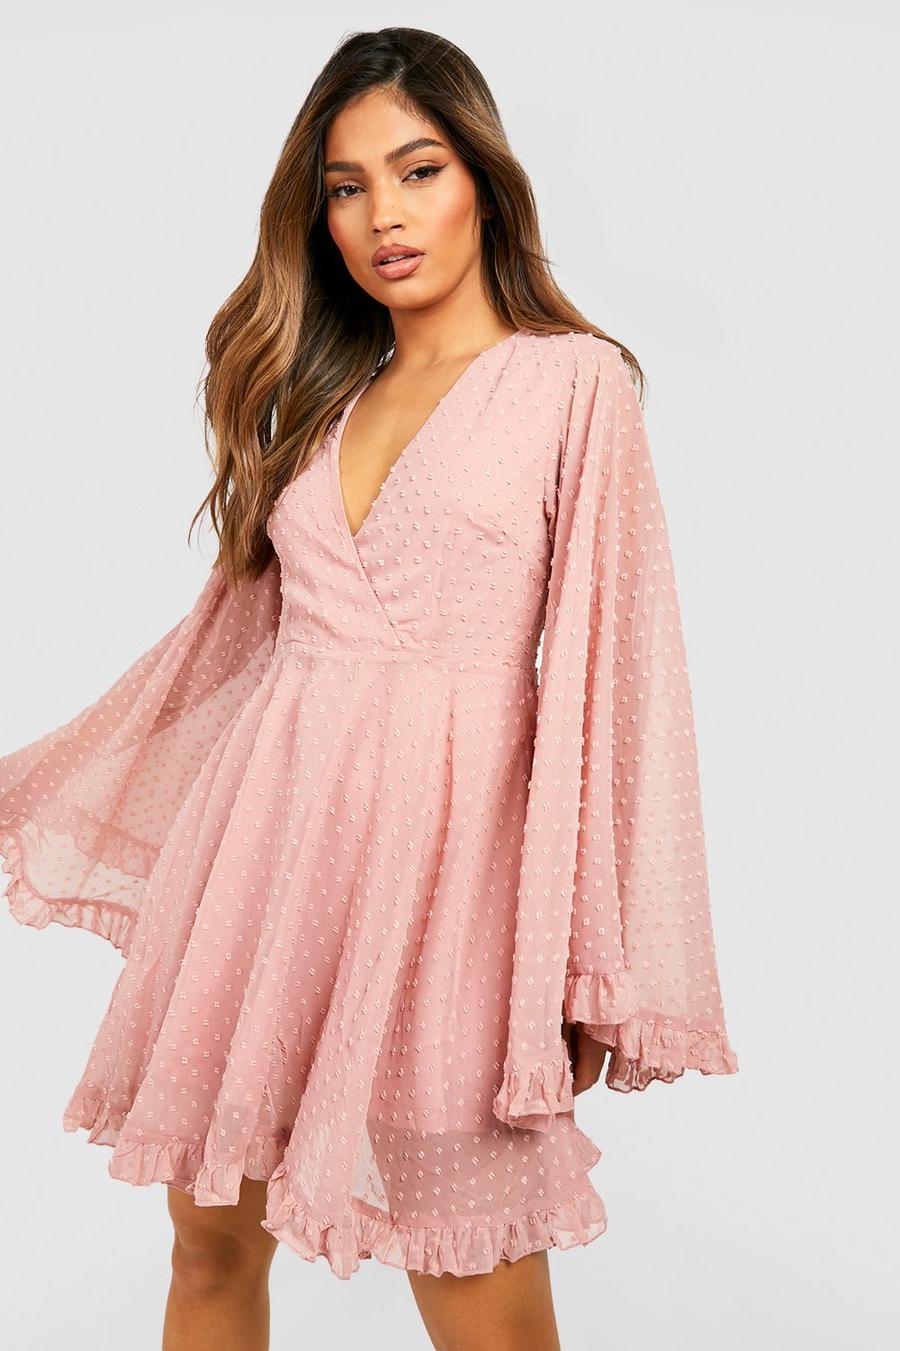 Robe patineuse à manches flare, Blush rose